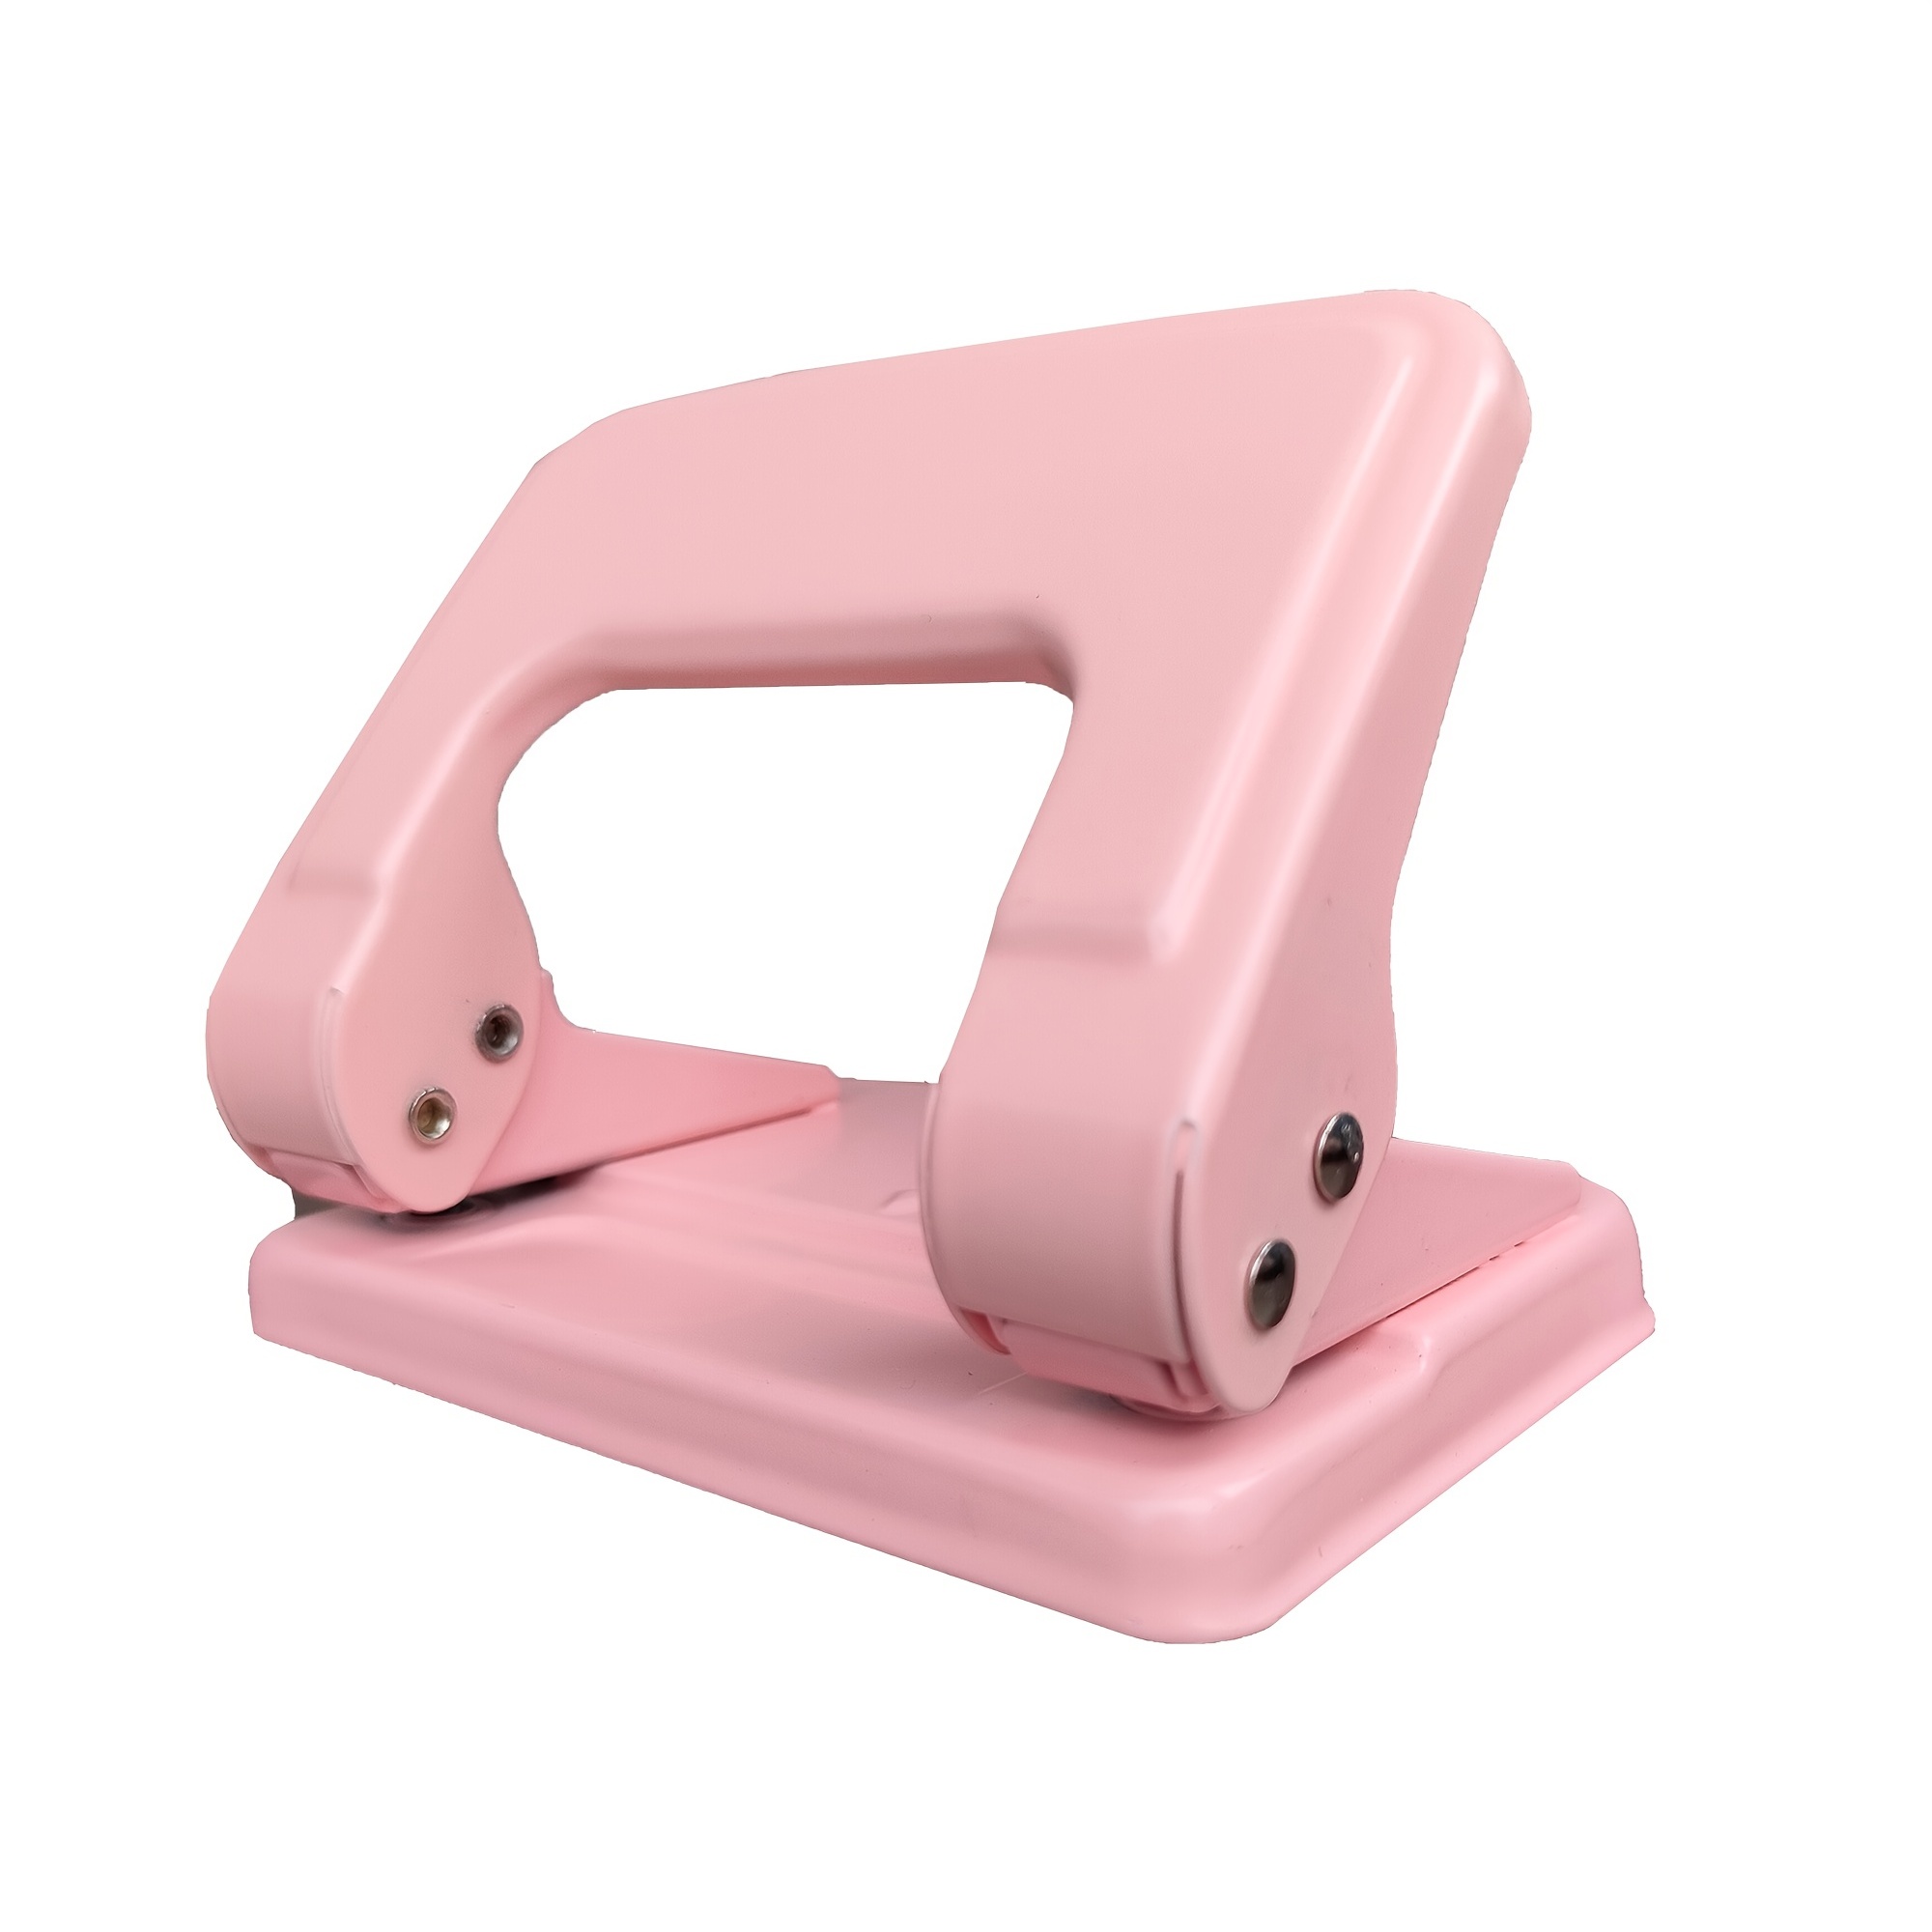 ZTWEY Hole Punch, Metal Hole Puncher, All Metal Design, 2 Hole Metal Punch,  Anti-slip Base